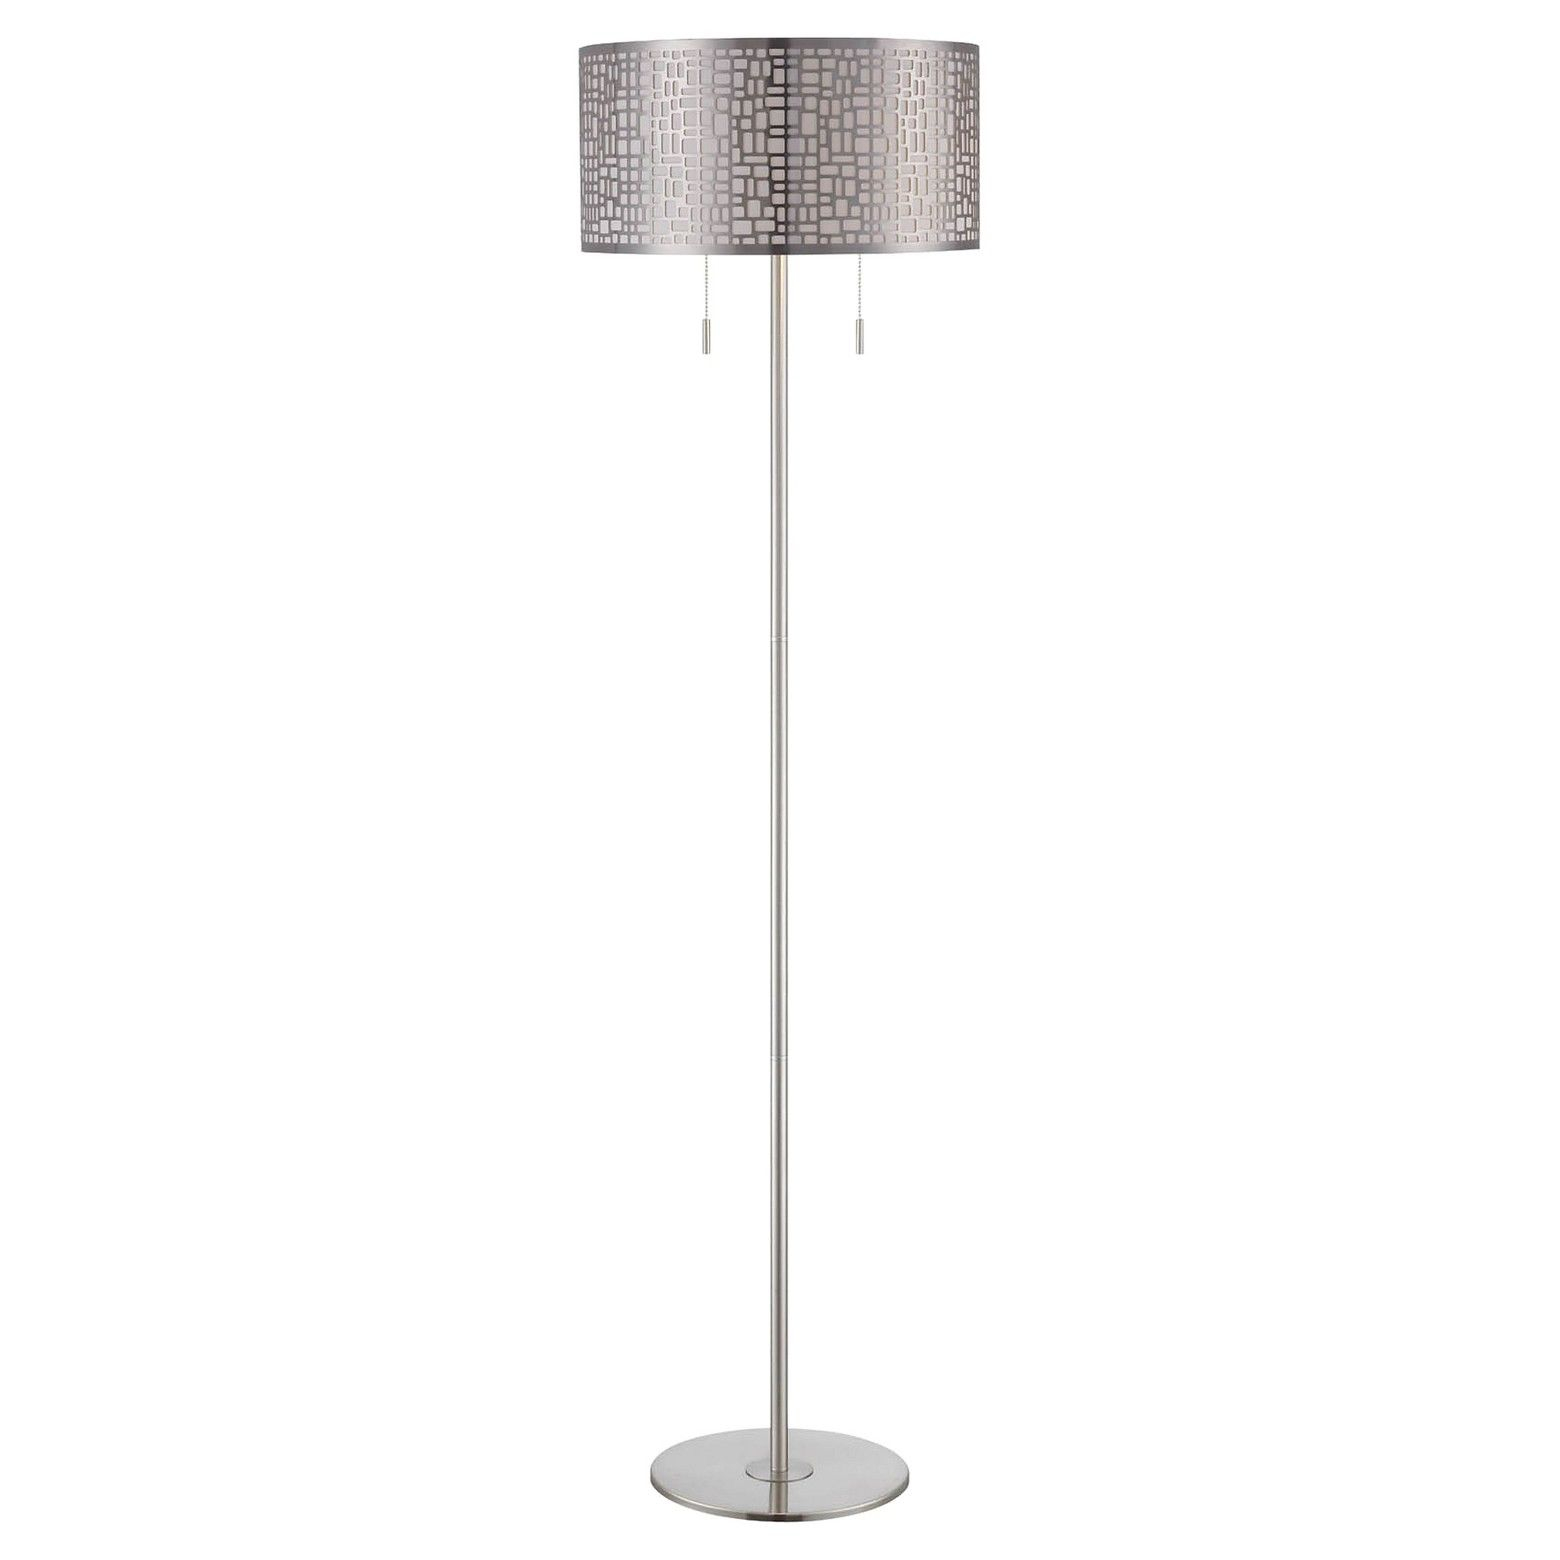 Lite Source Torre 2 Lt Floor Lamp Polished Steel Silver throughout sizing 1560 X 1560